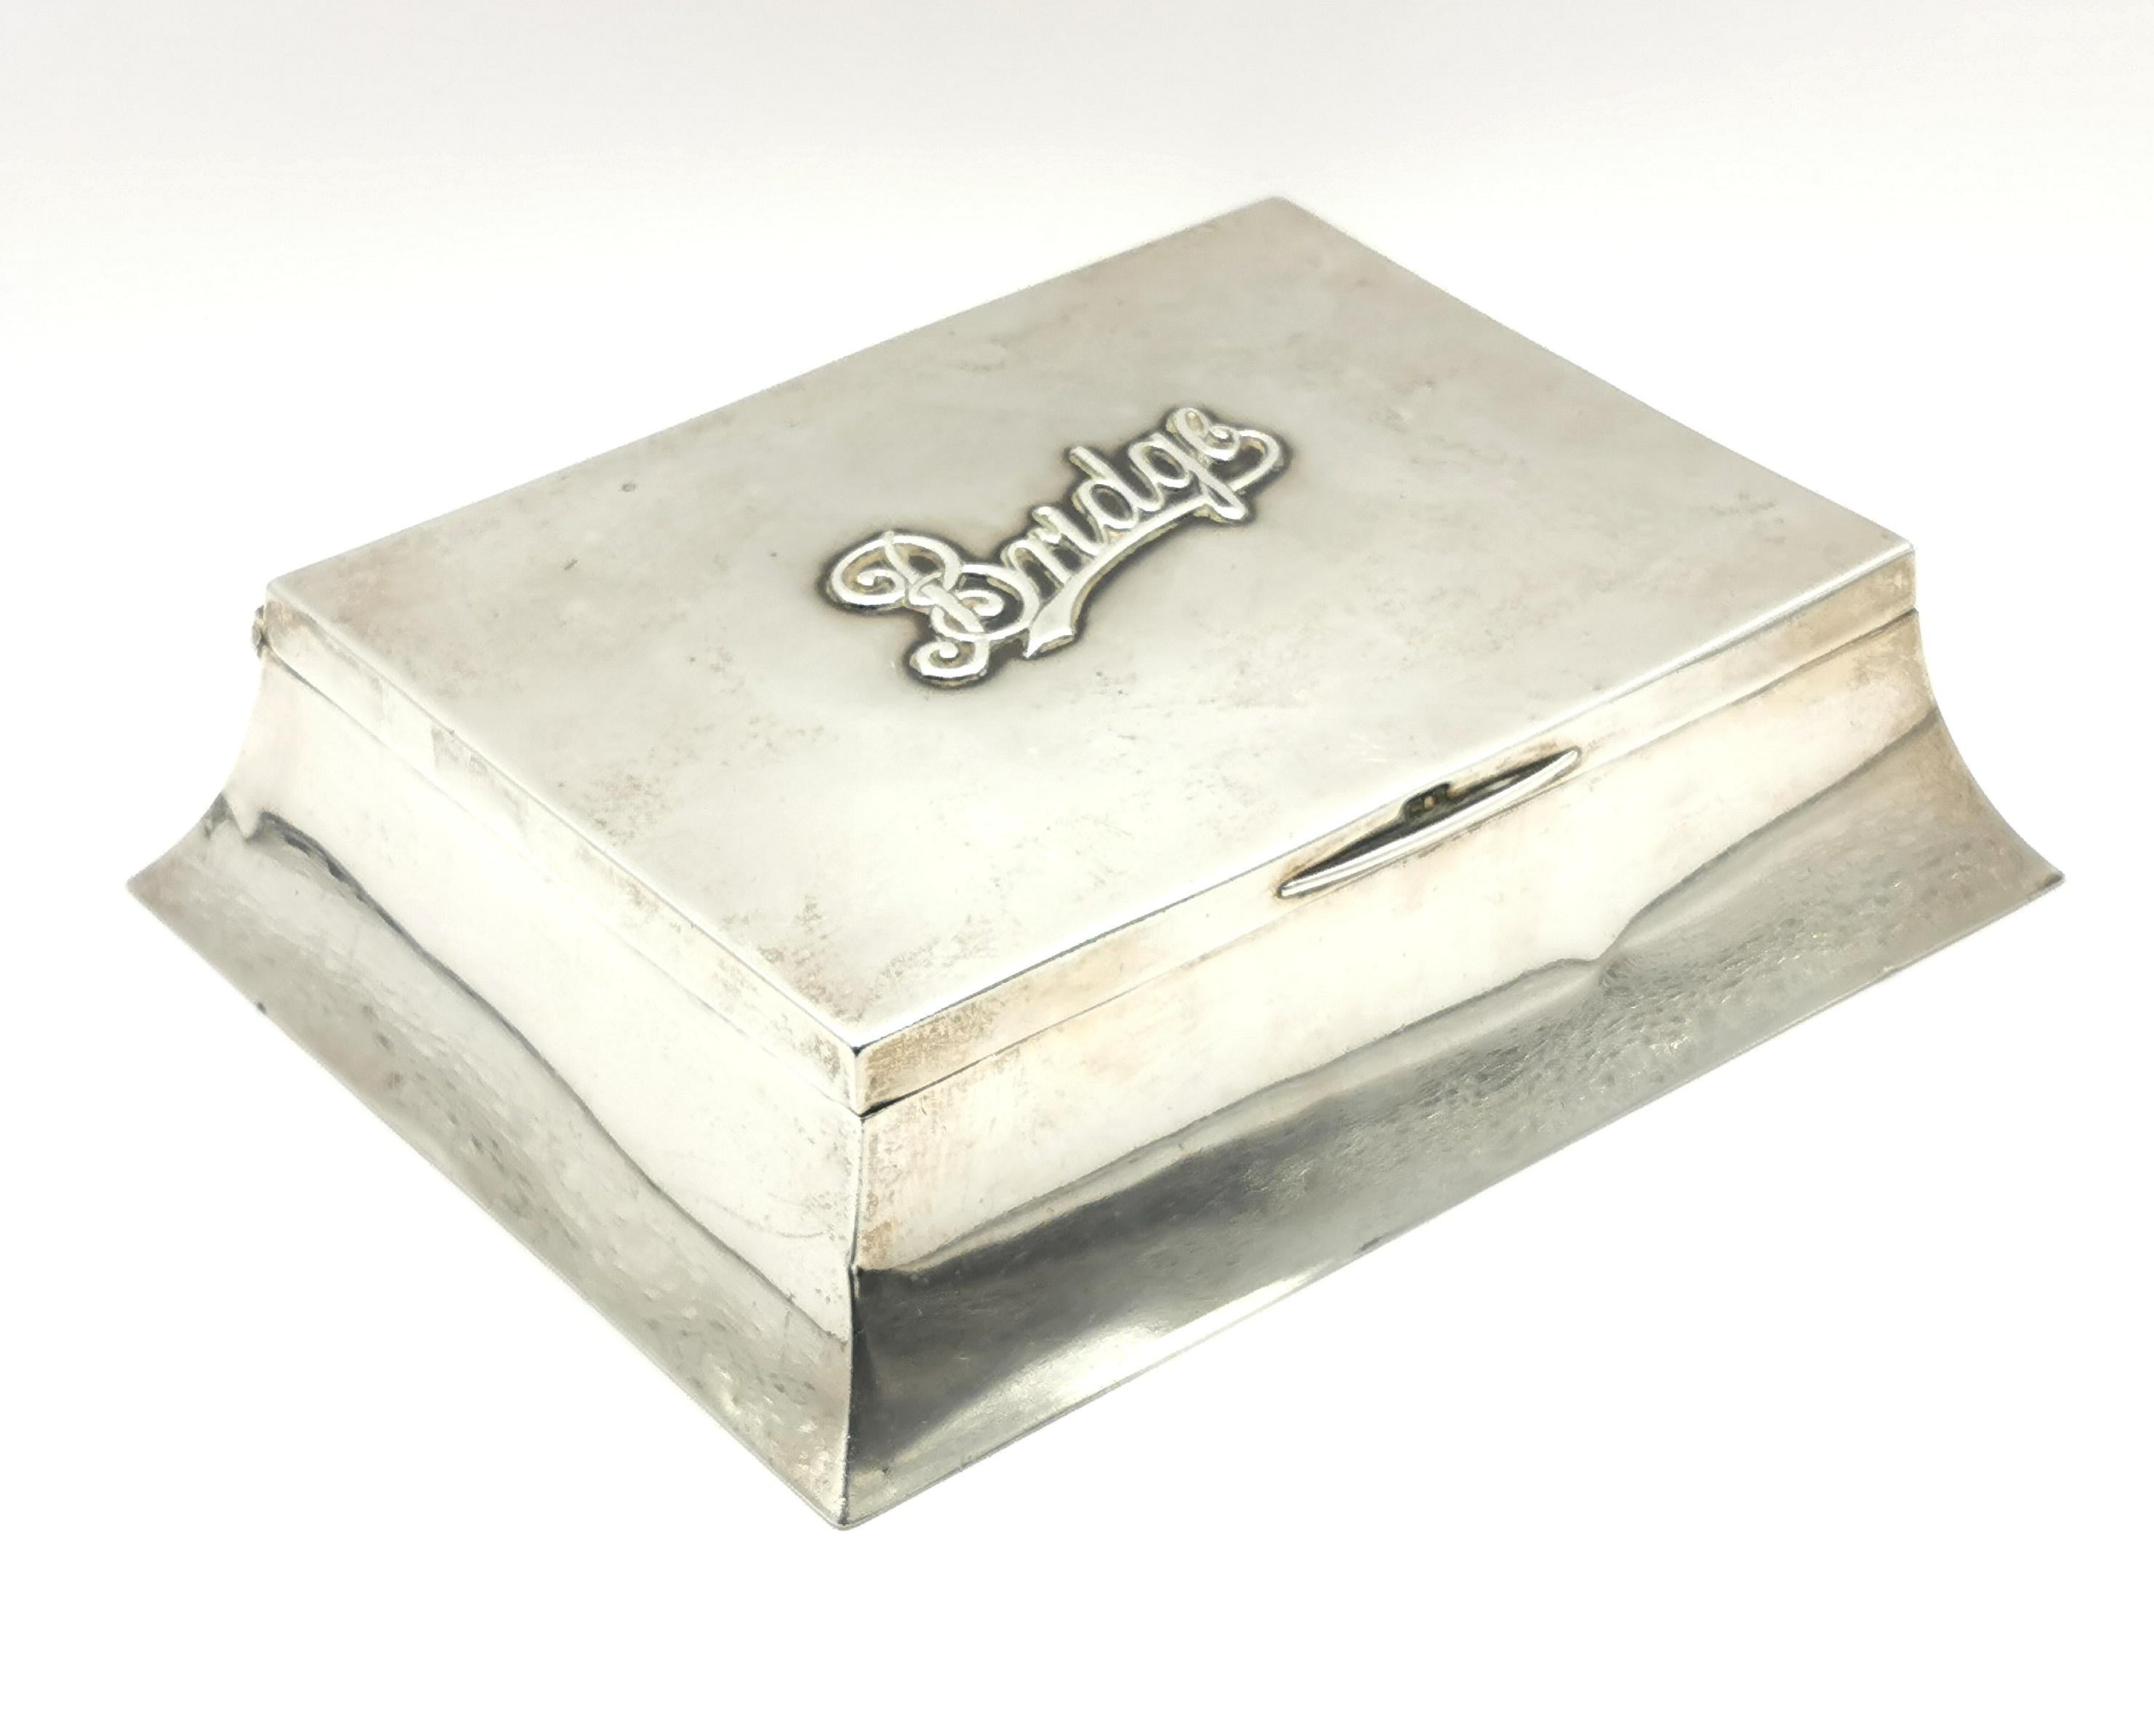 A very fine and large Antique sterling silver bridge box or playing card box.

It is a good size and lined with cedar wood with space for two decks of cards, it has sloped canted sides and embossed silver lettering to the top which reads